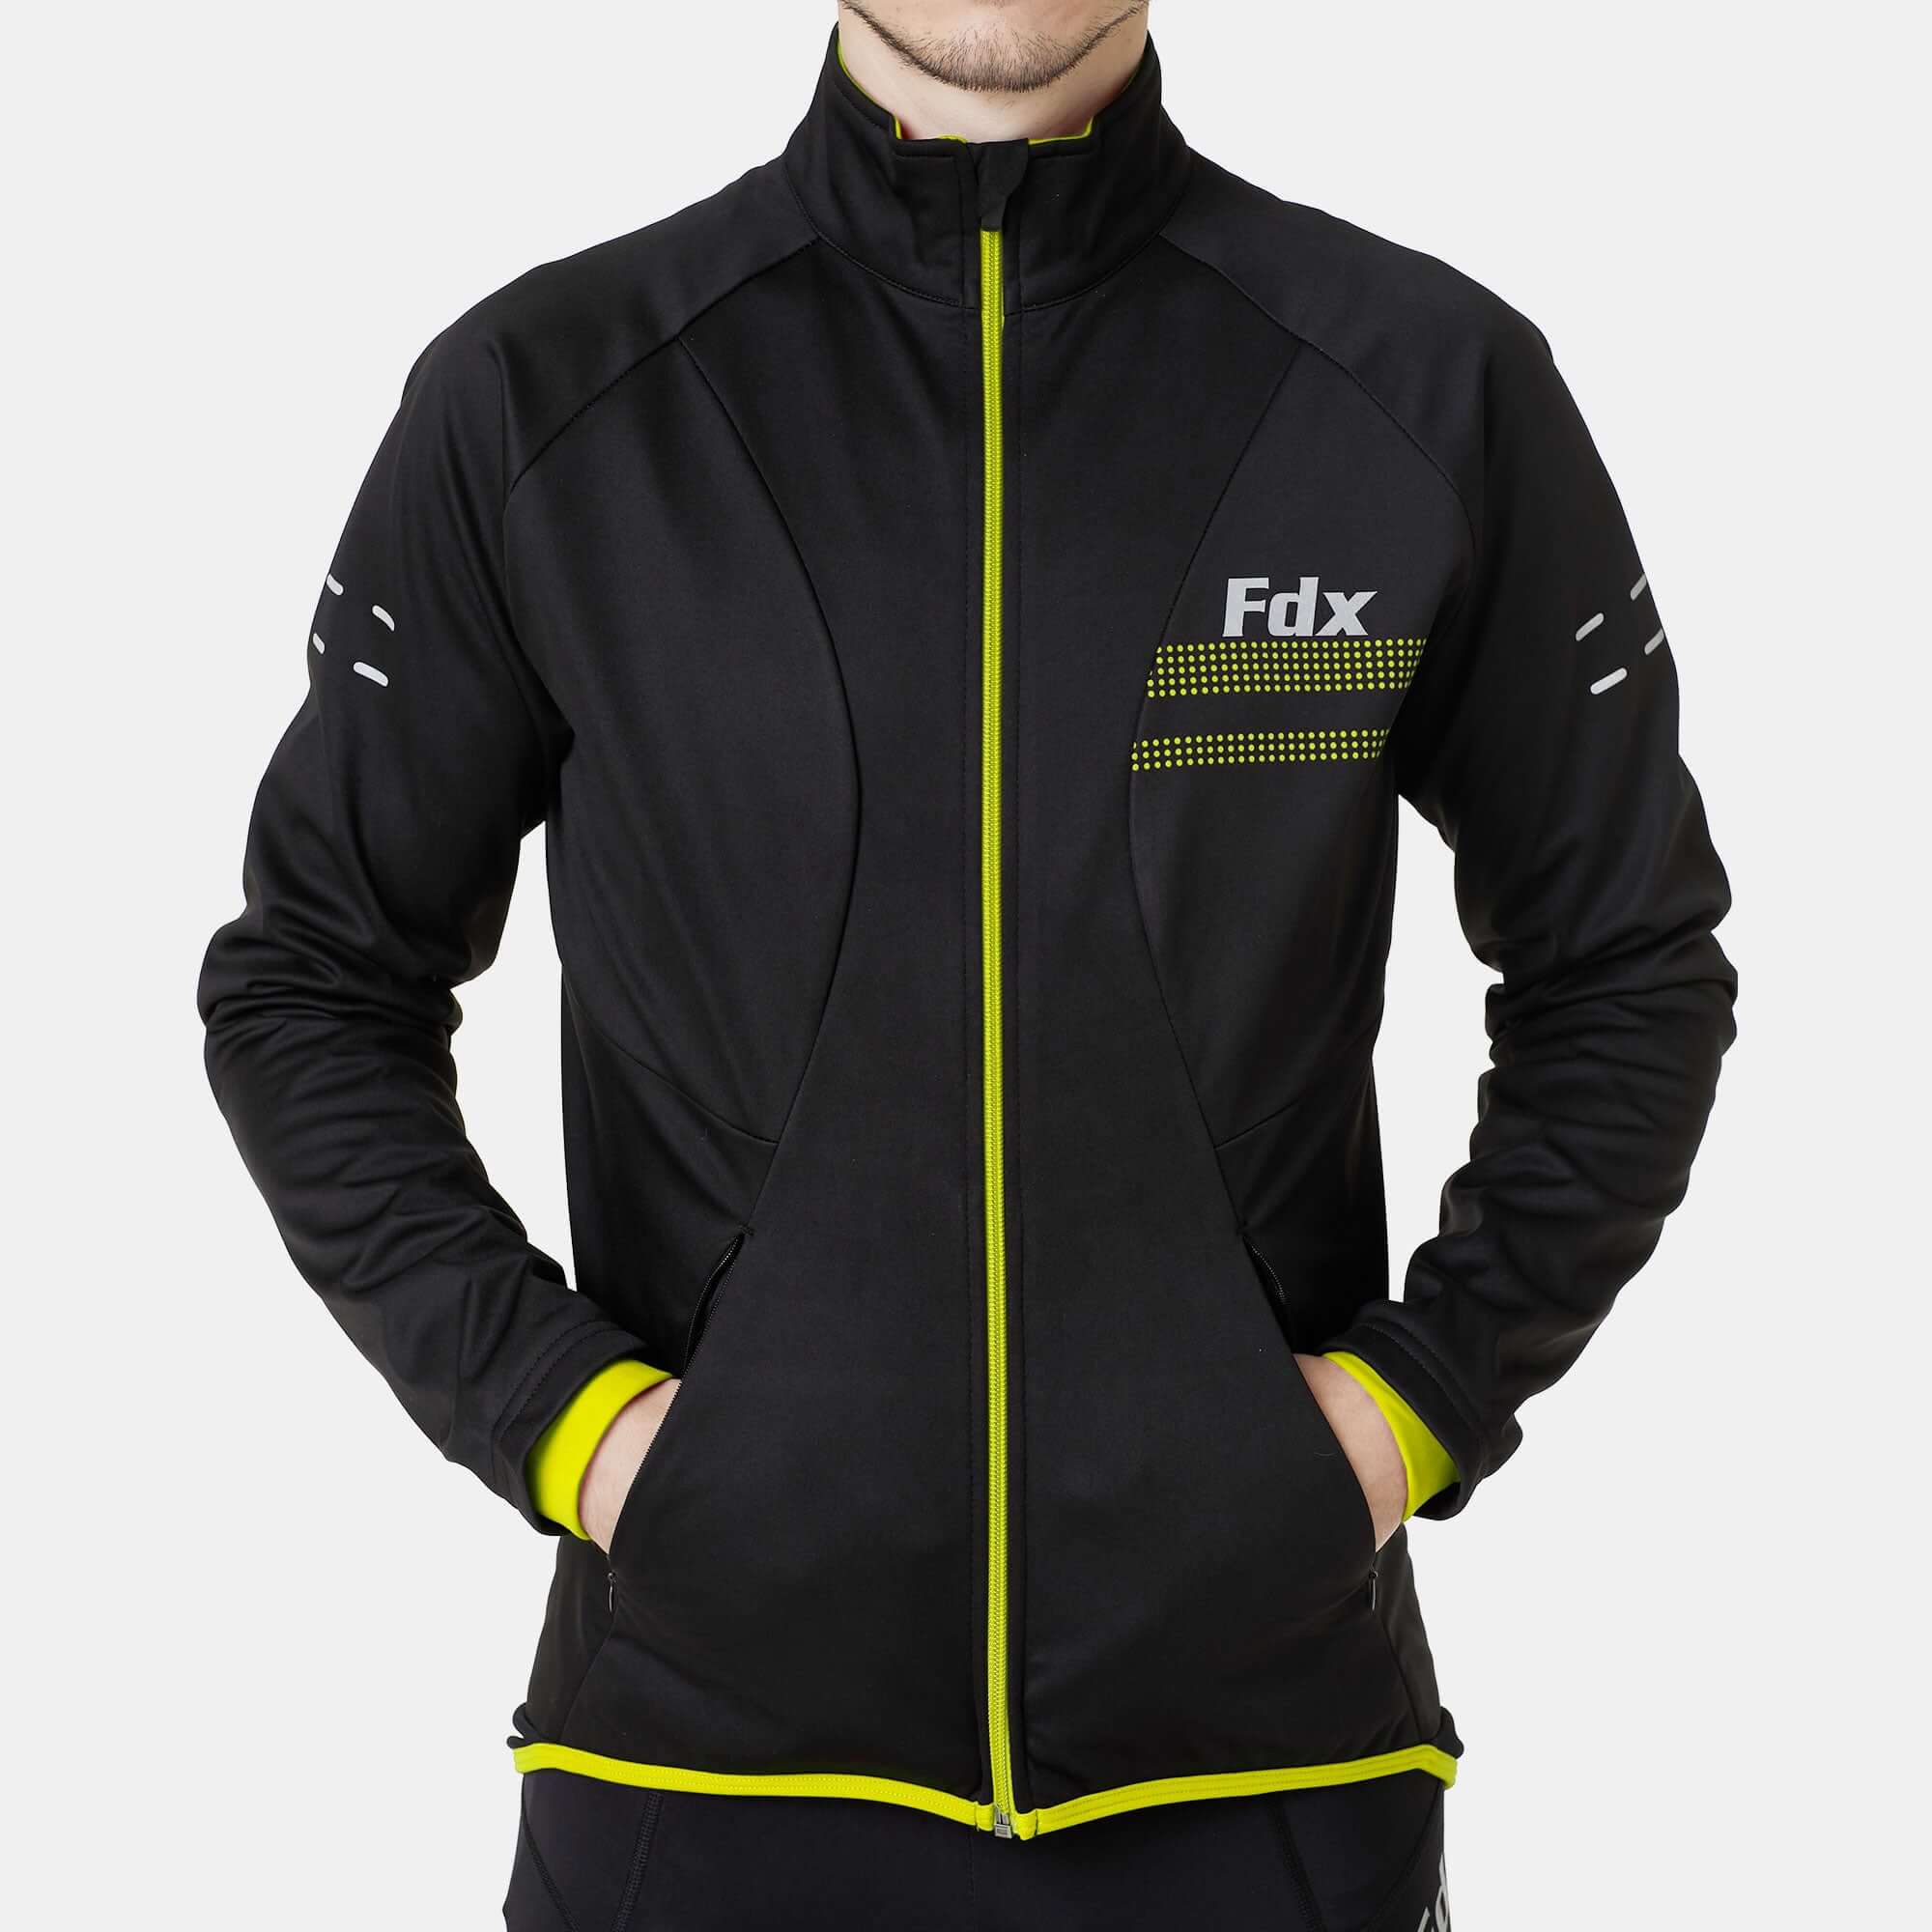 Fdx Mens Black & Fluorescent Cycling Jacket for Winter Thermal Casual Softshell Clothing Lightweight, Windproof, Waterproof & Pockets - Arch